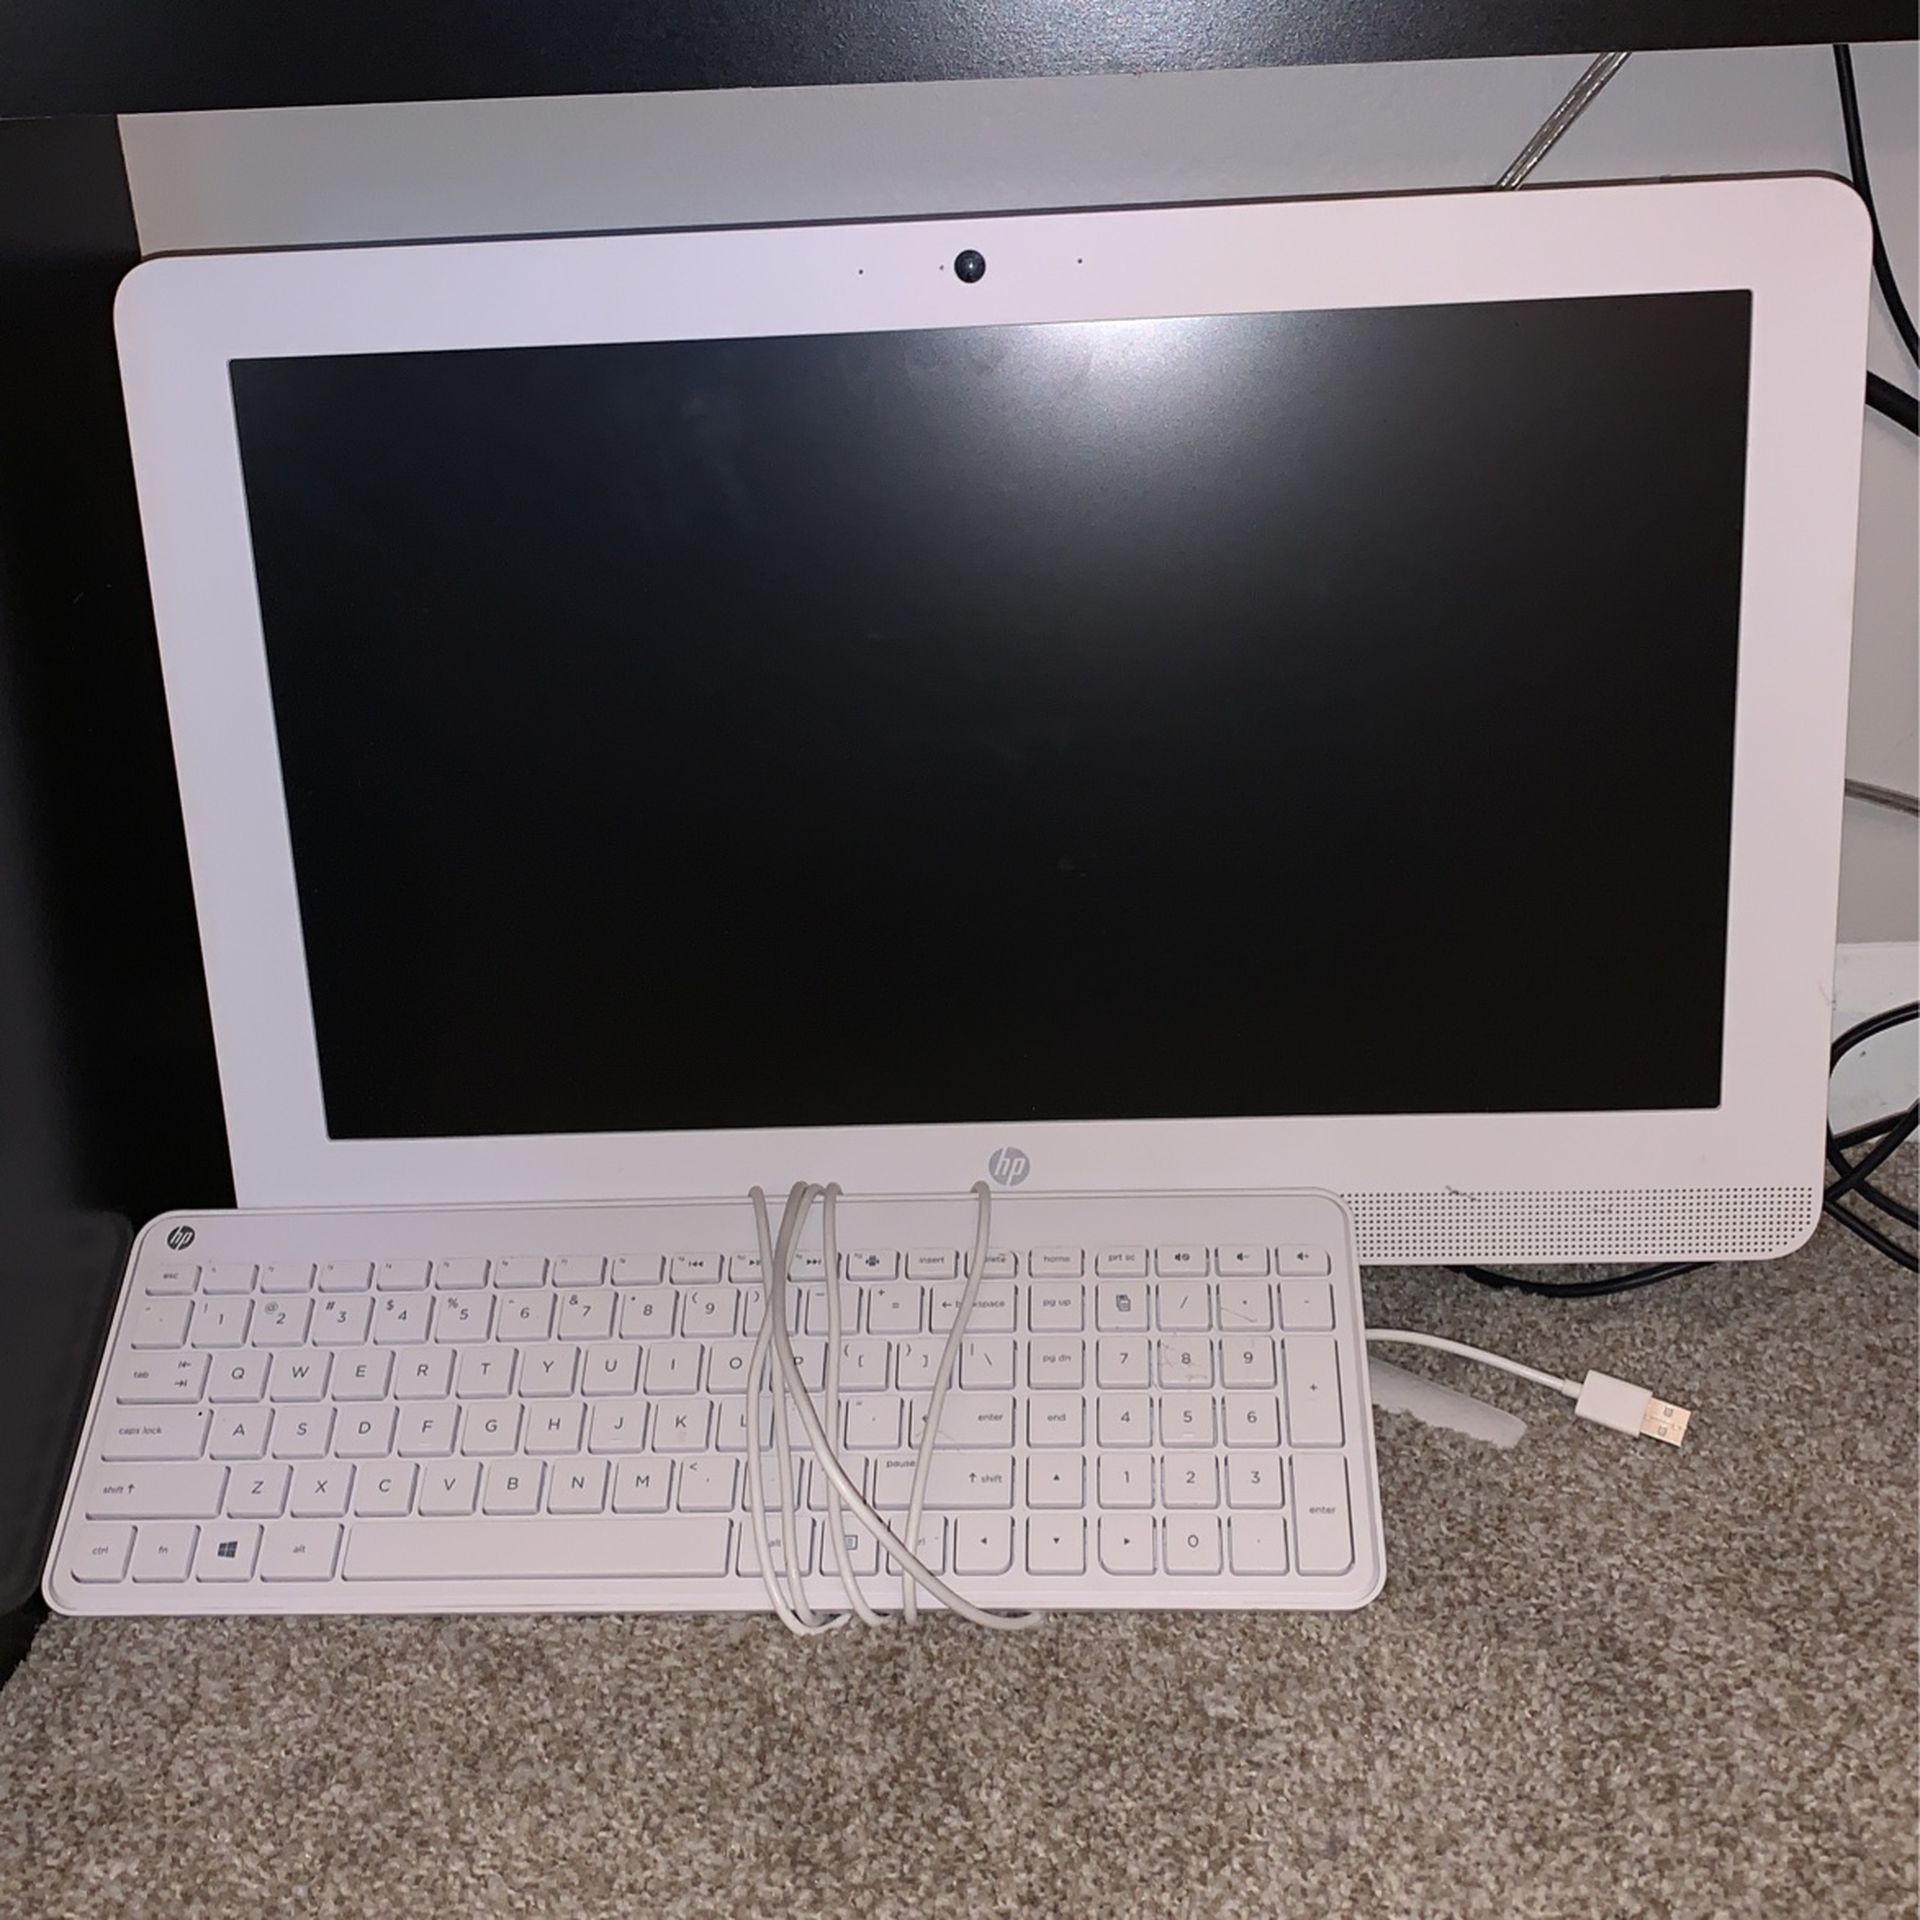 HP computer with Keyboard